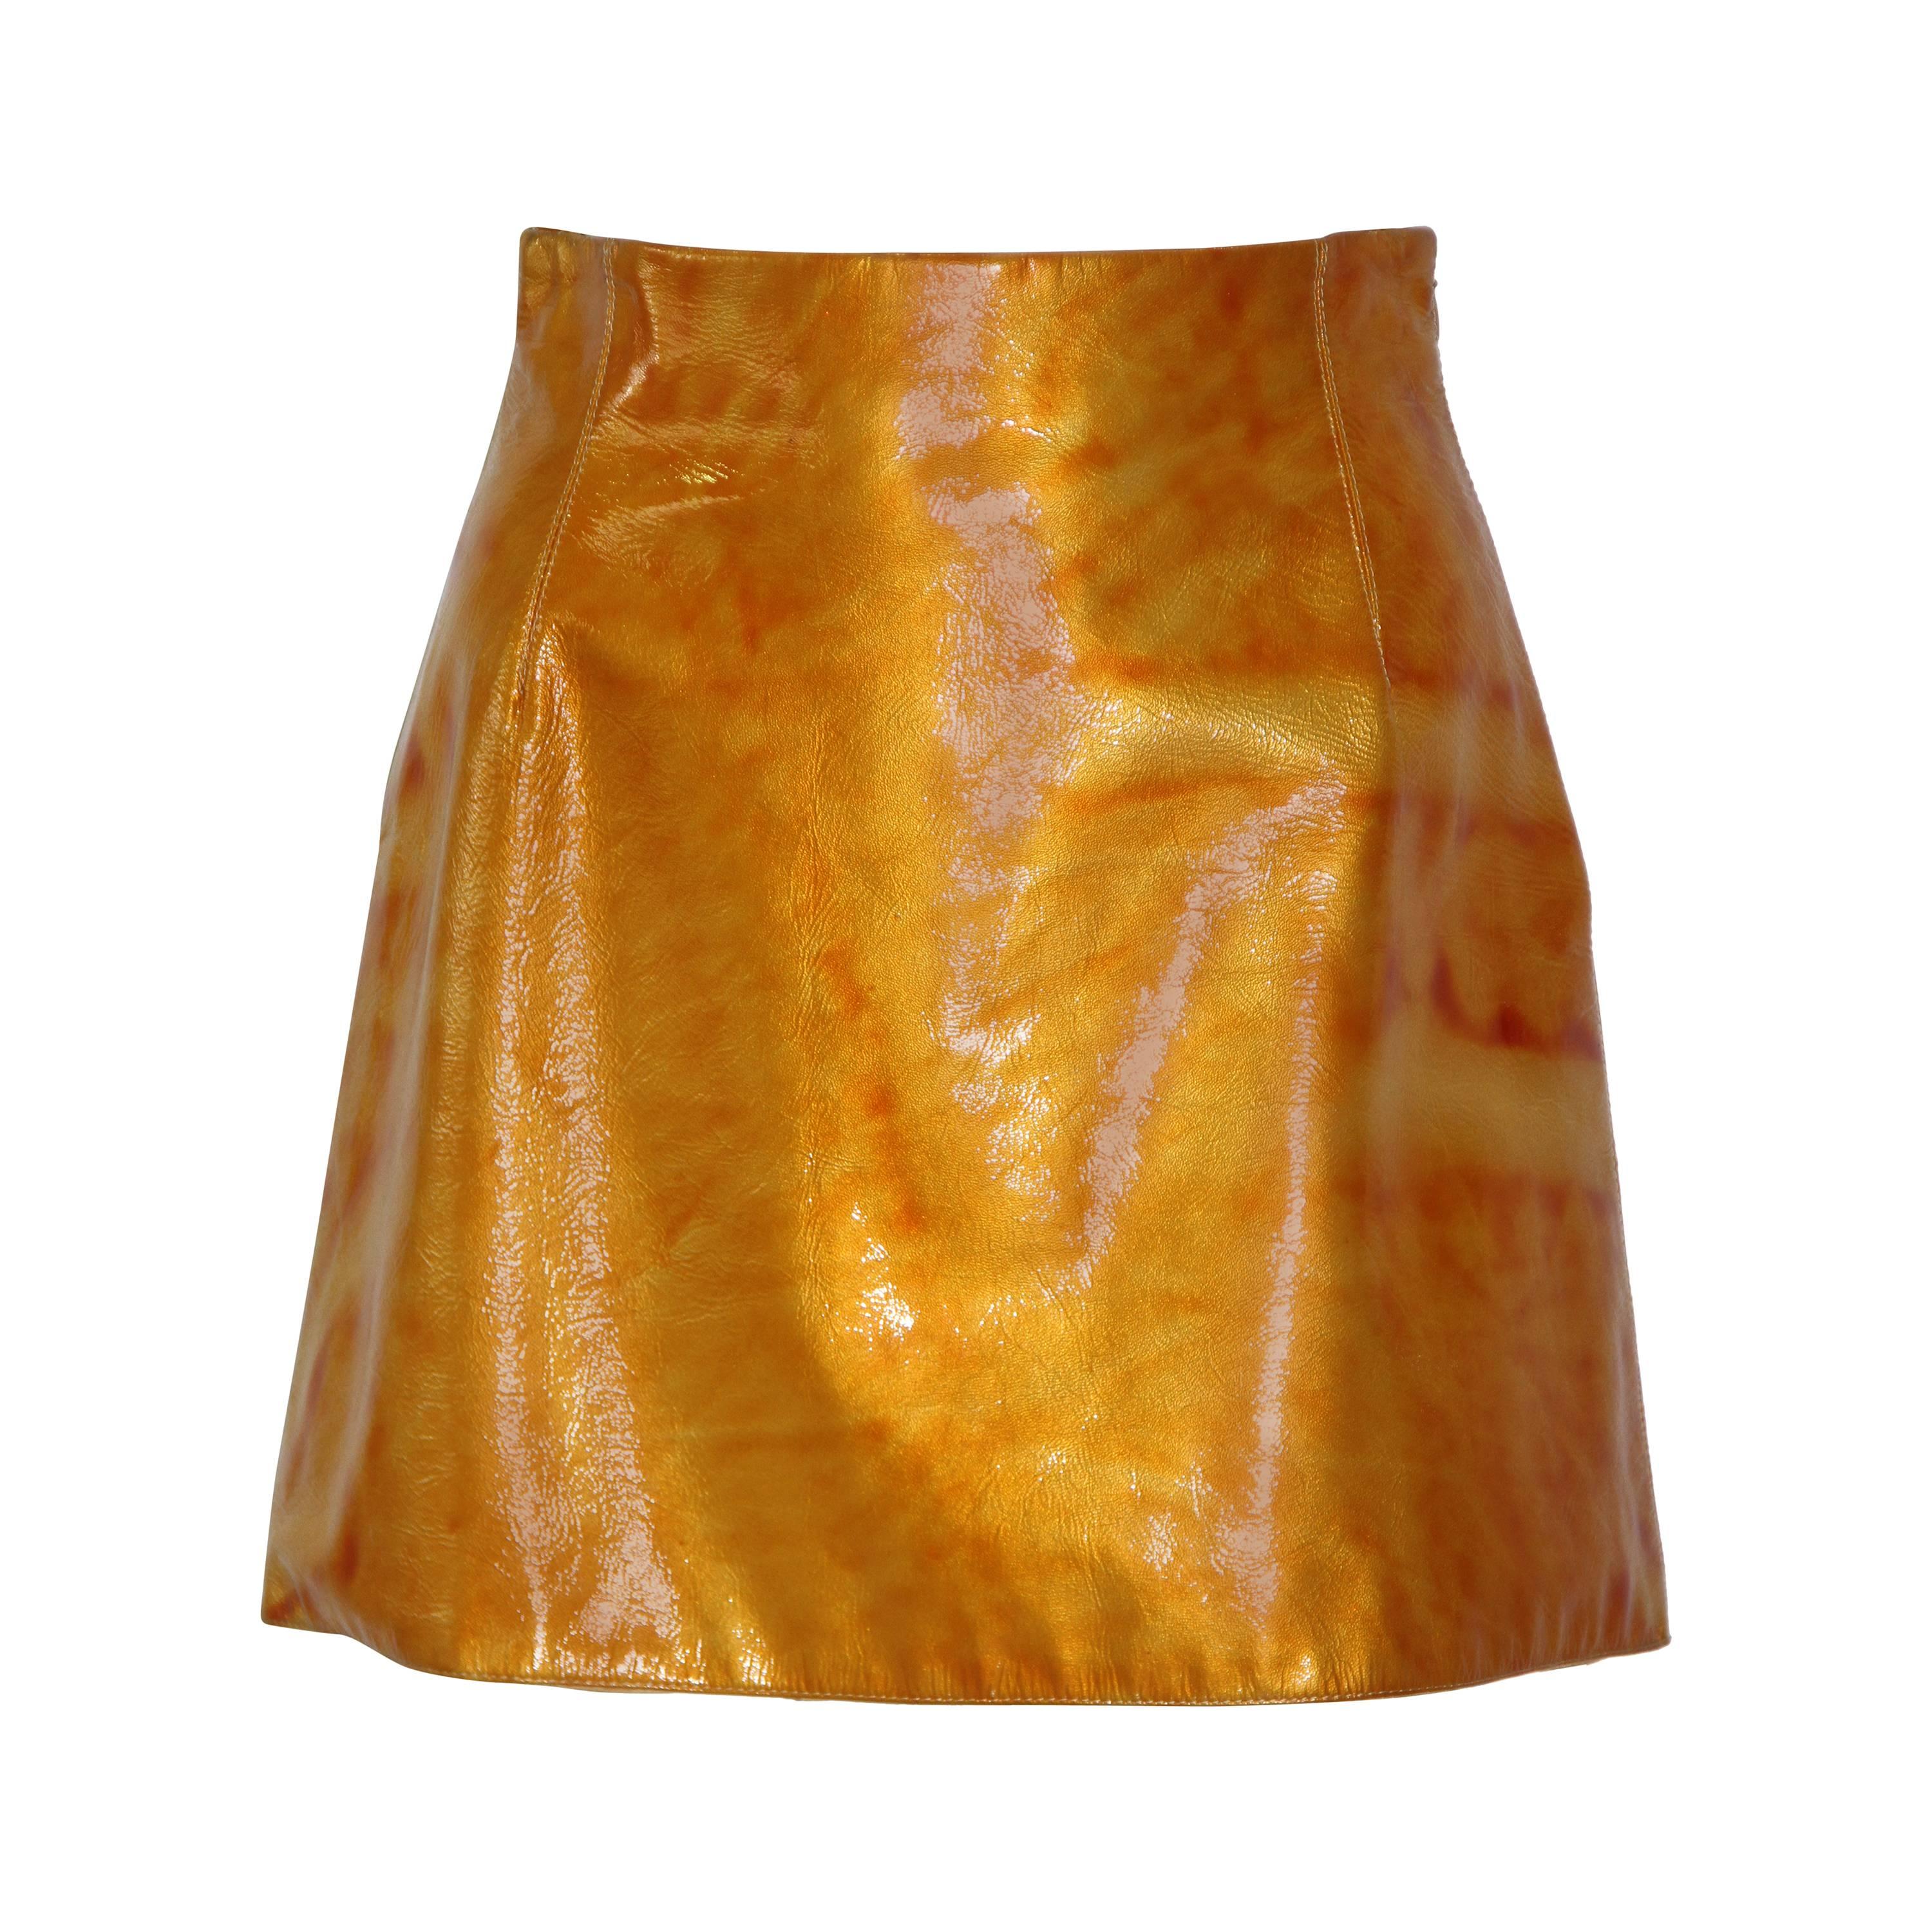 Gianni Versace Leather Skirt Fall 1995 For Sale